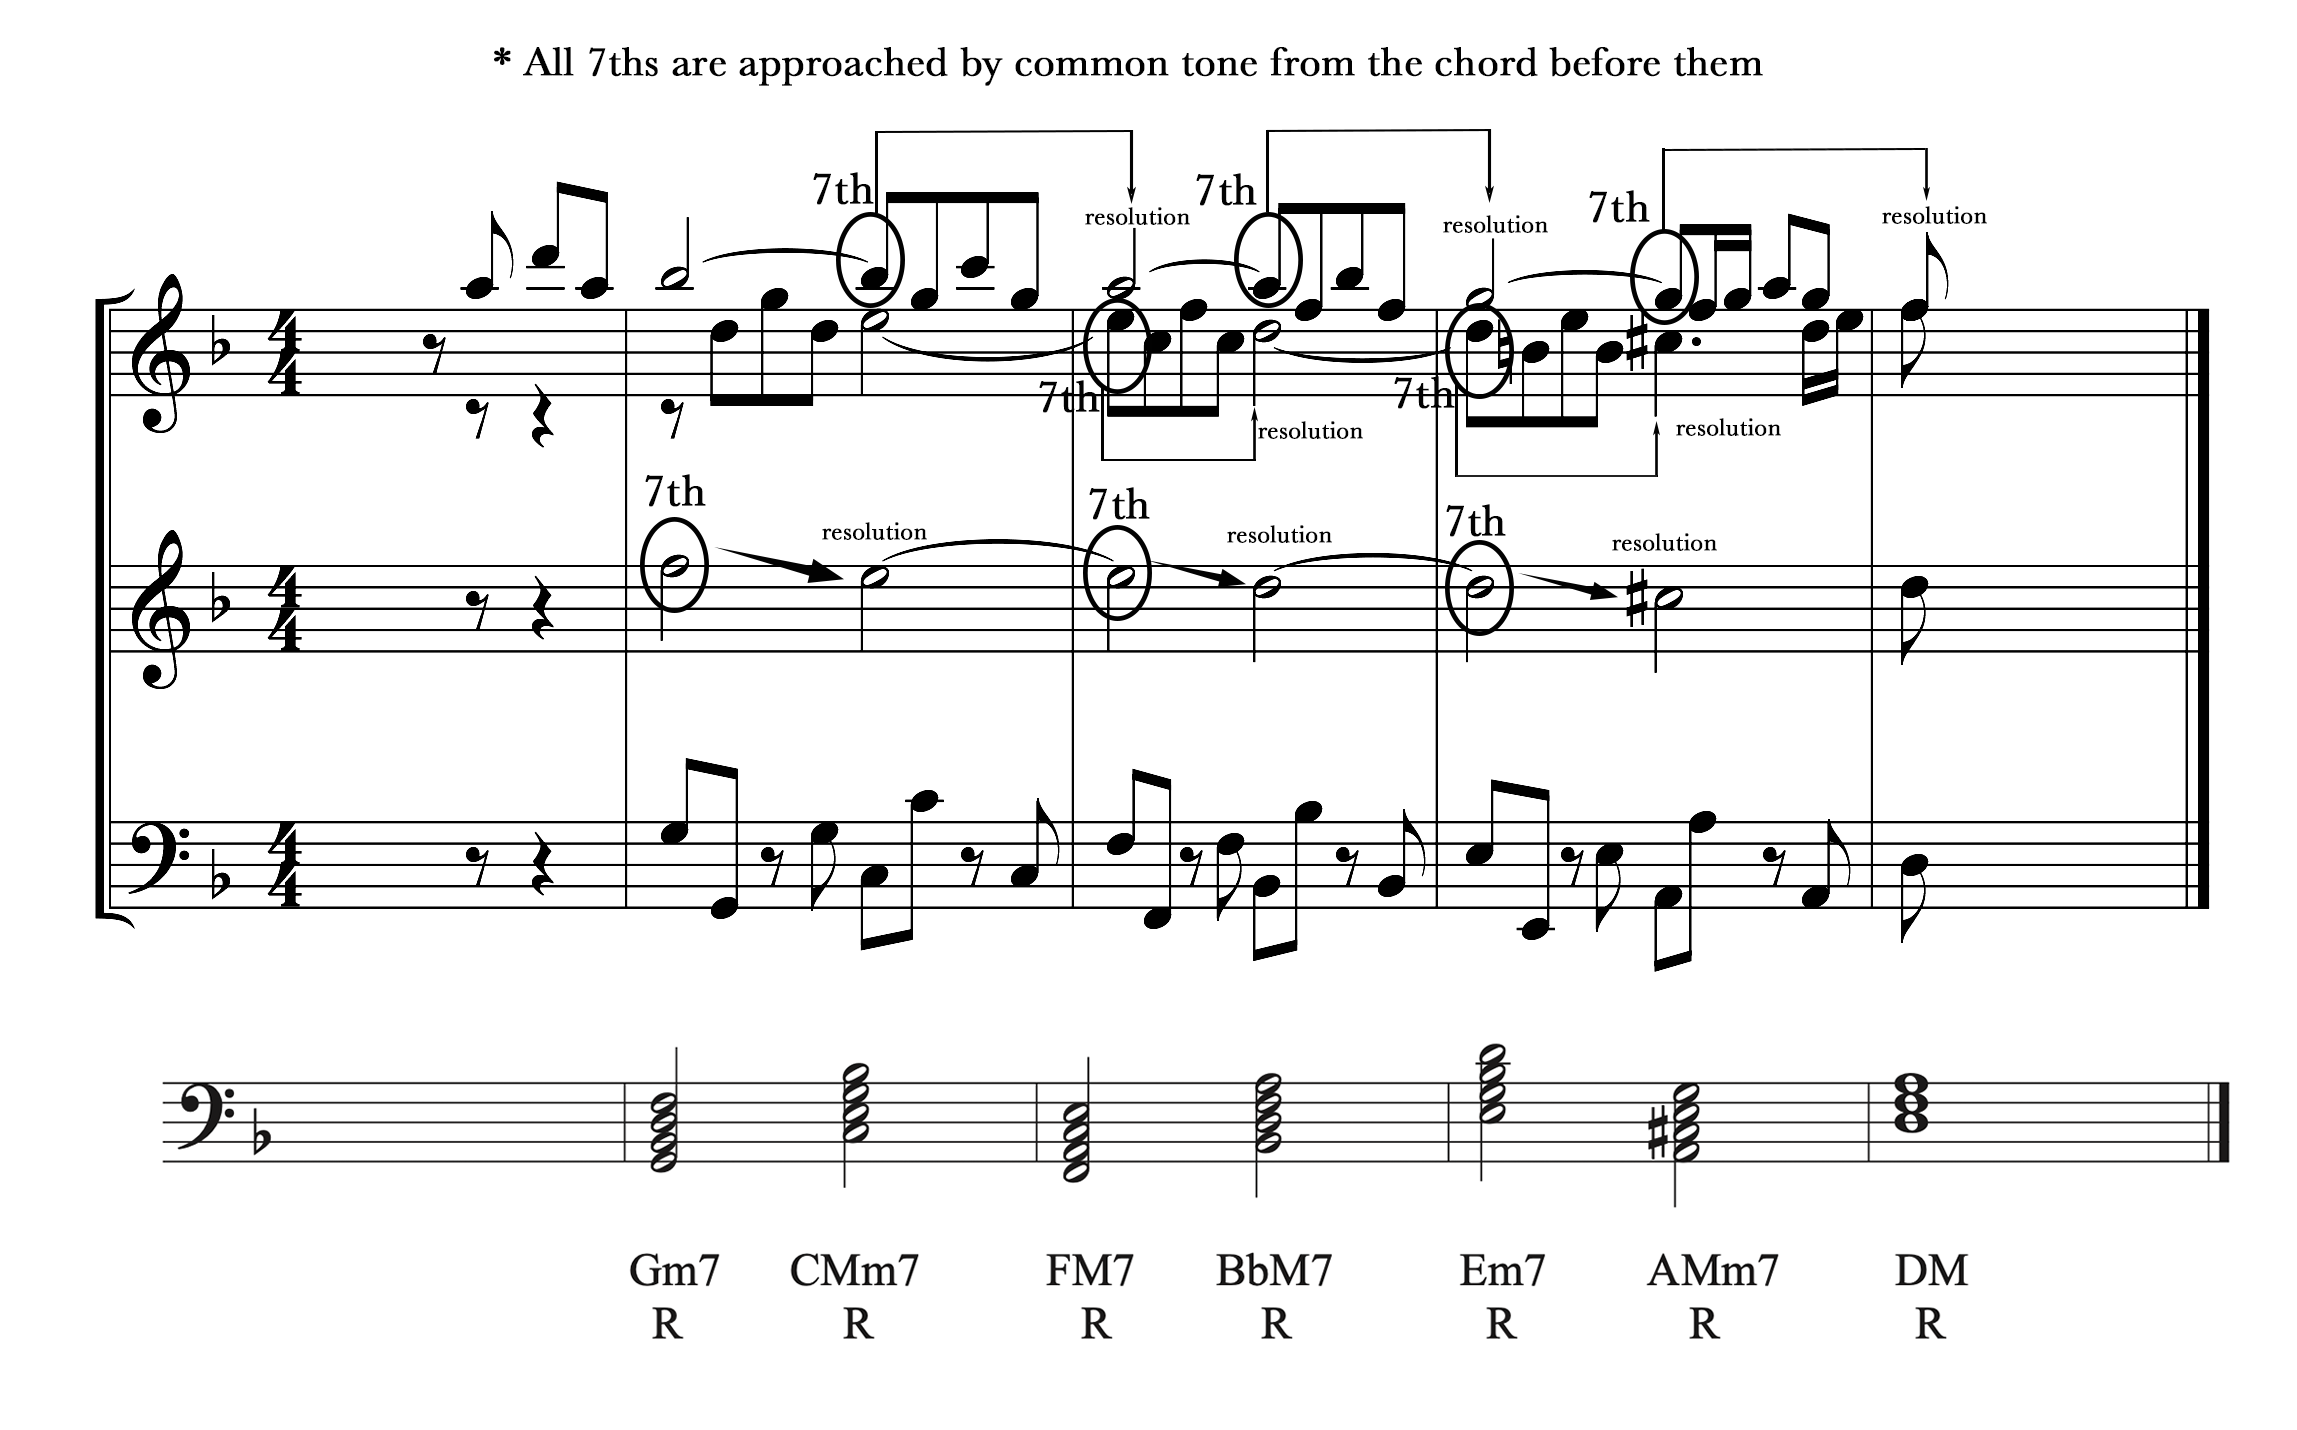 The excerpt from J.S. Bach's Brandenburg Concerto with chordal analysis and chordal sevenths labeled.